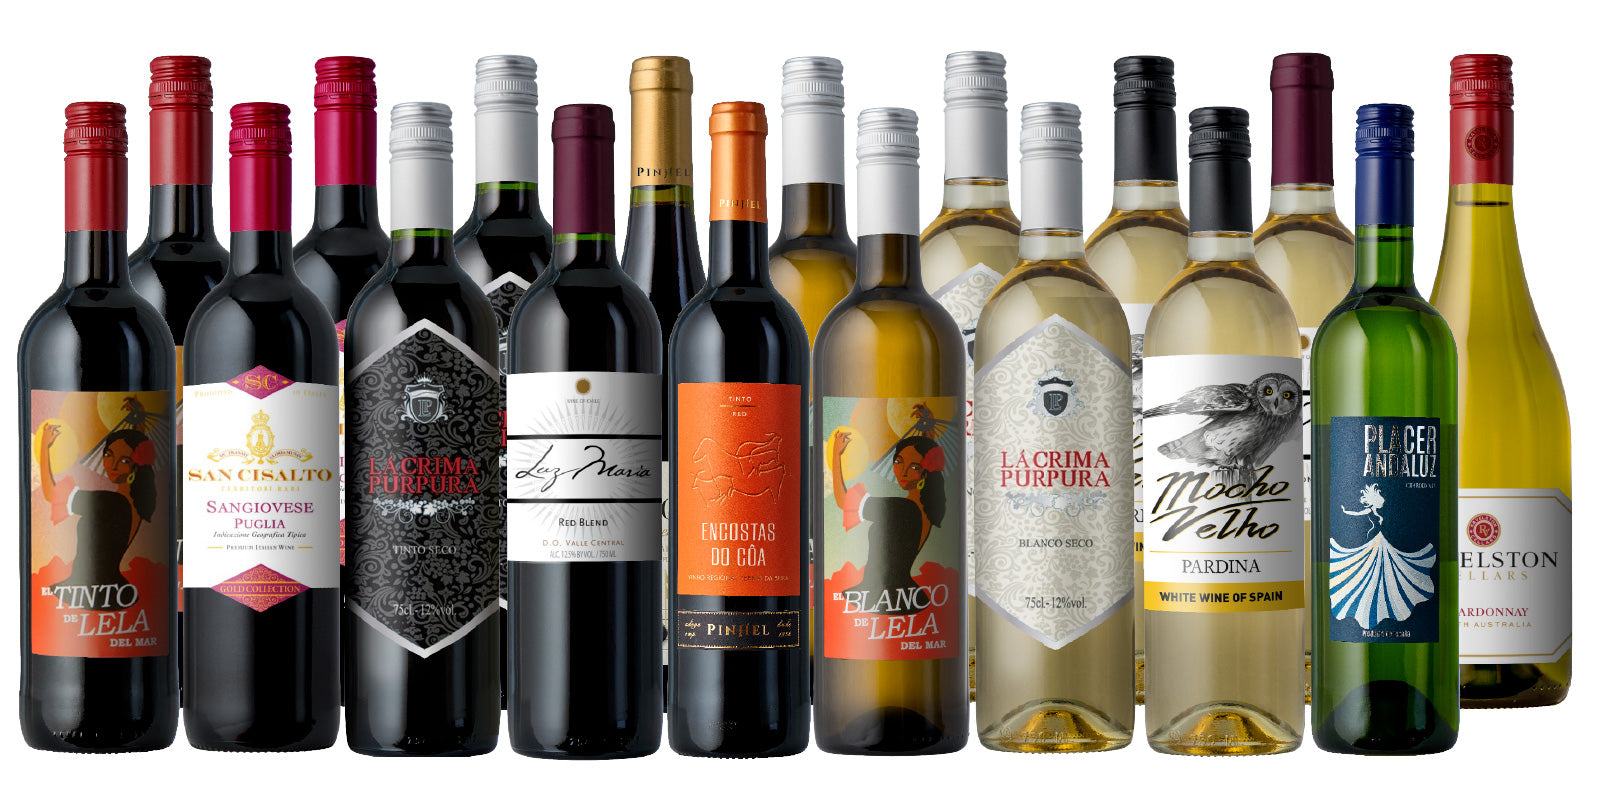 $5.55 Wines - 33,000 Reviews Celebration 18-Pack!